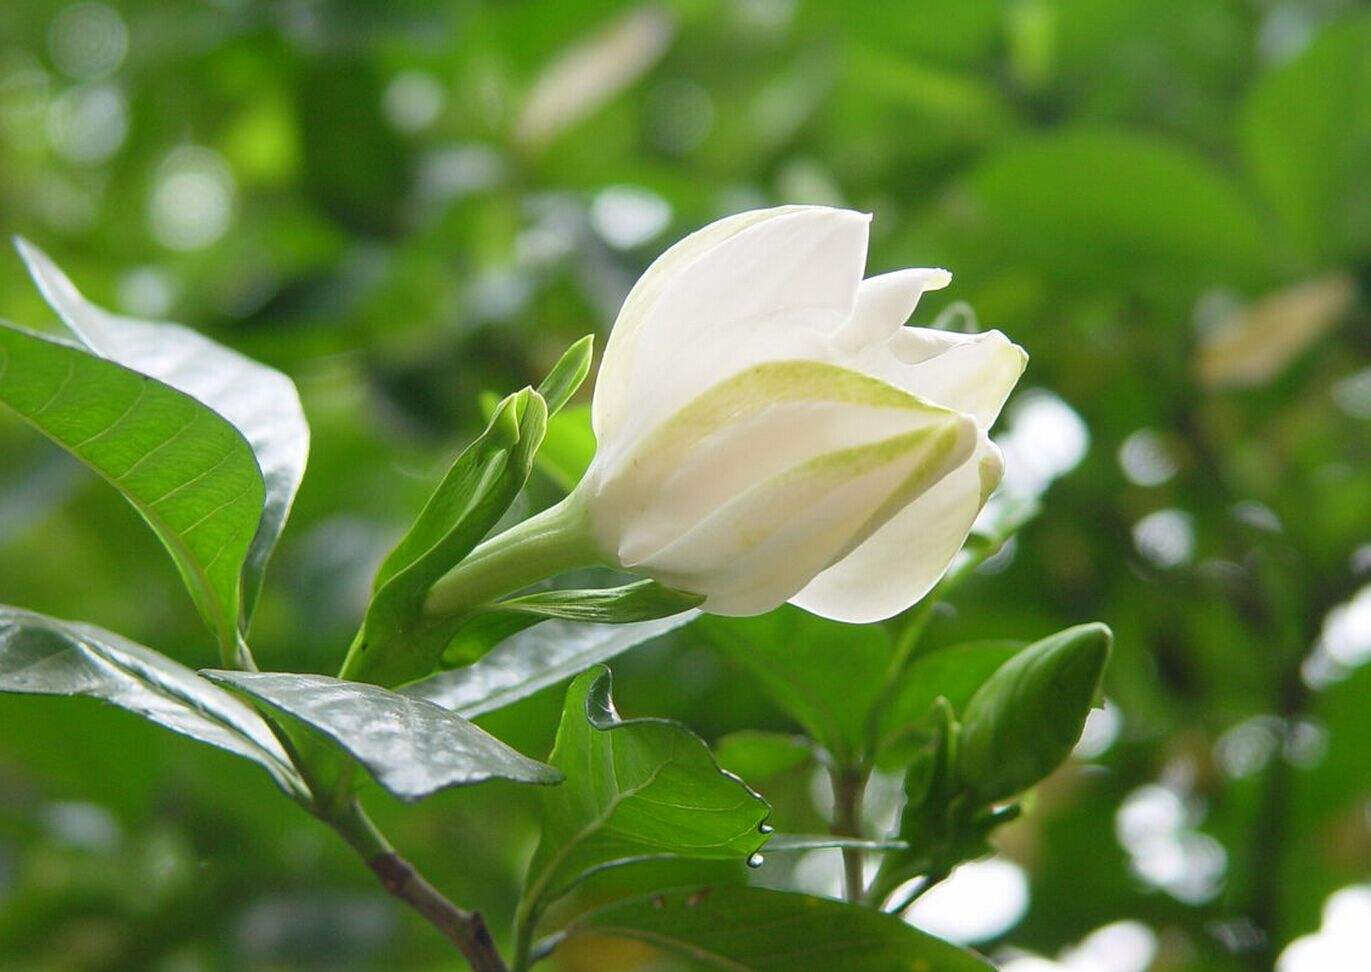 He Gui " Cape jasmine is spent " the secret that fashionable whole nation must say